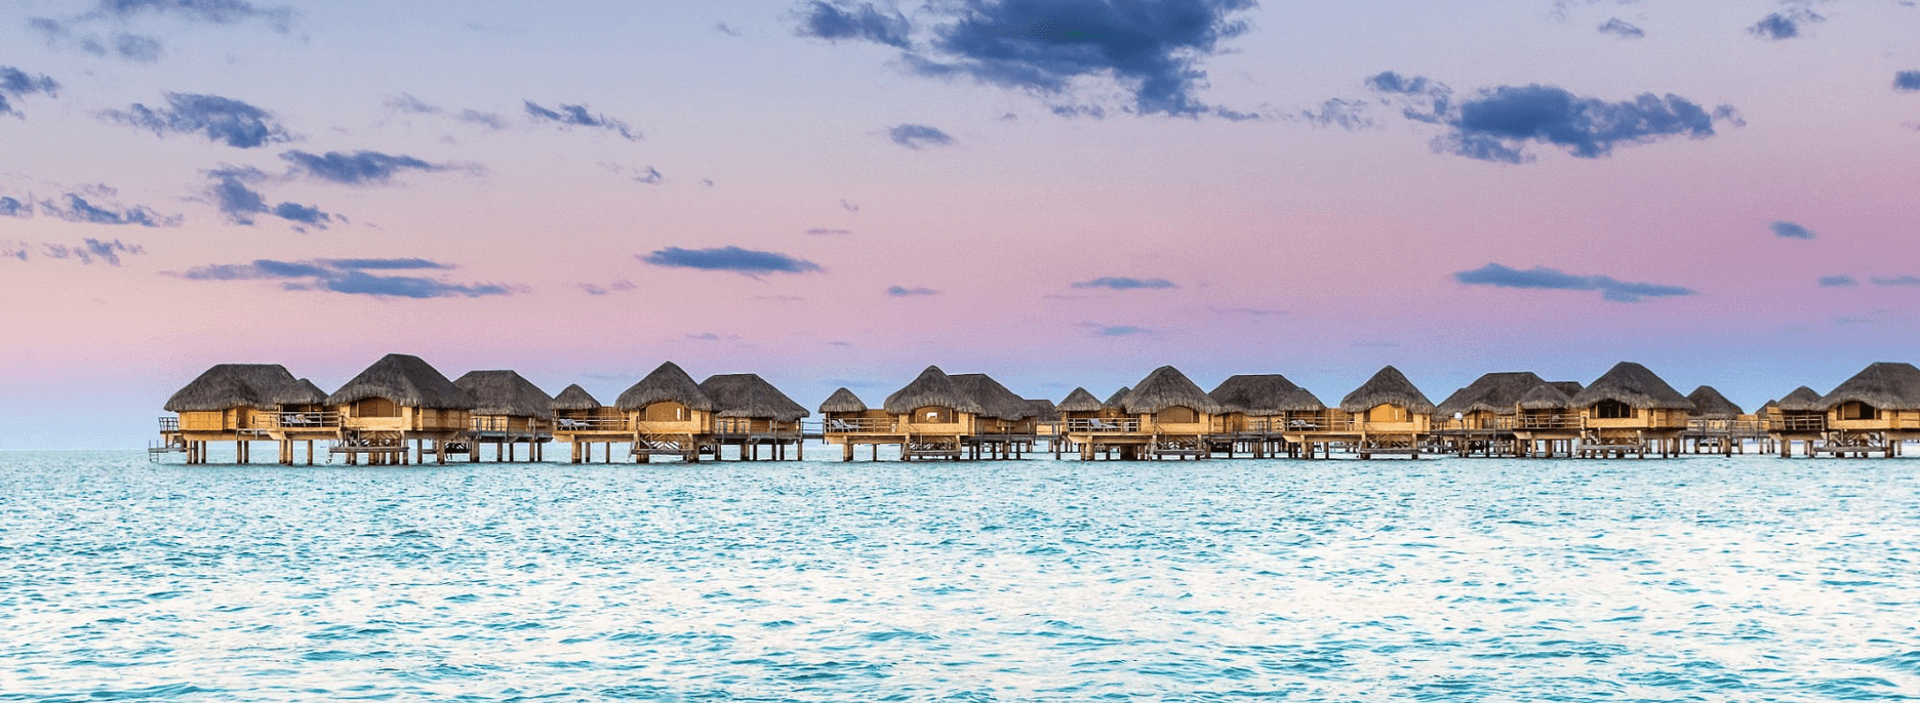 Luxury Luxury Hotels in French Polynesia vacations